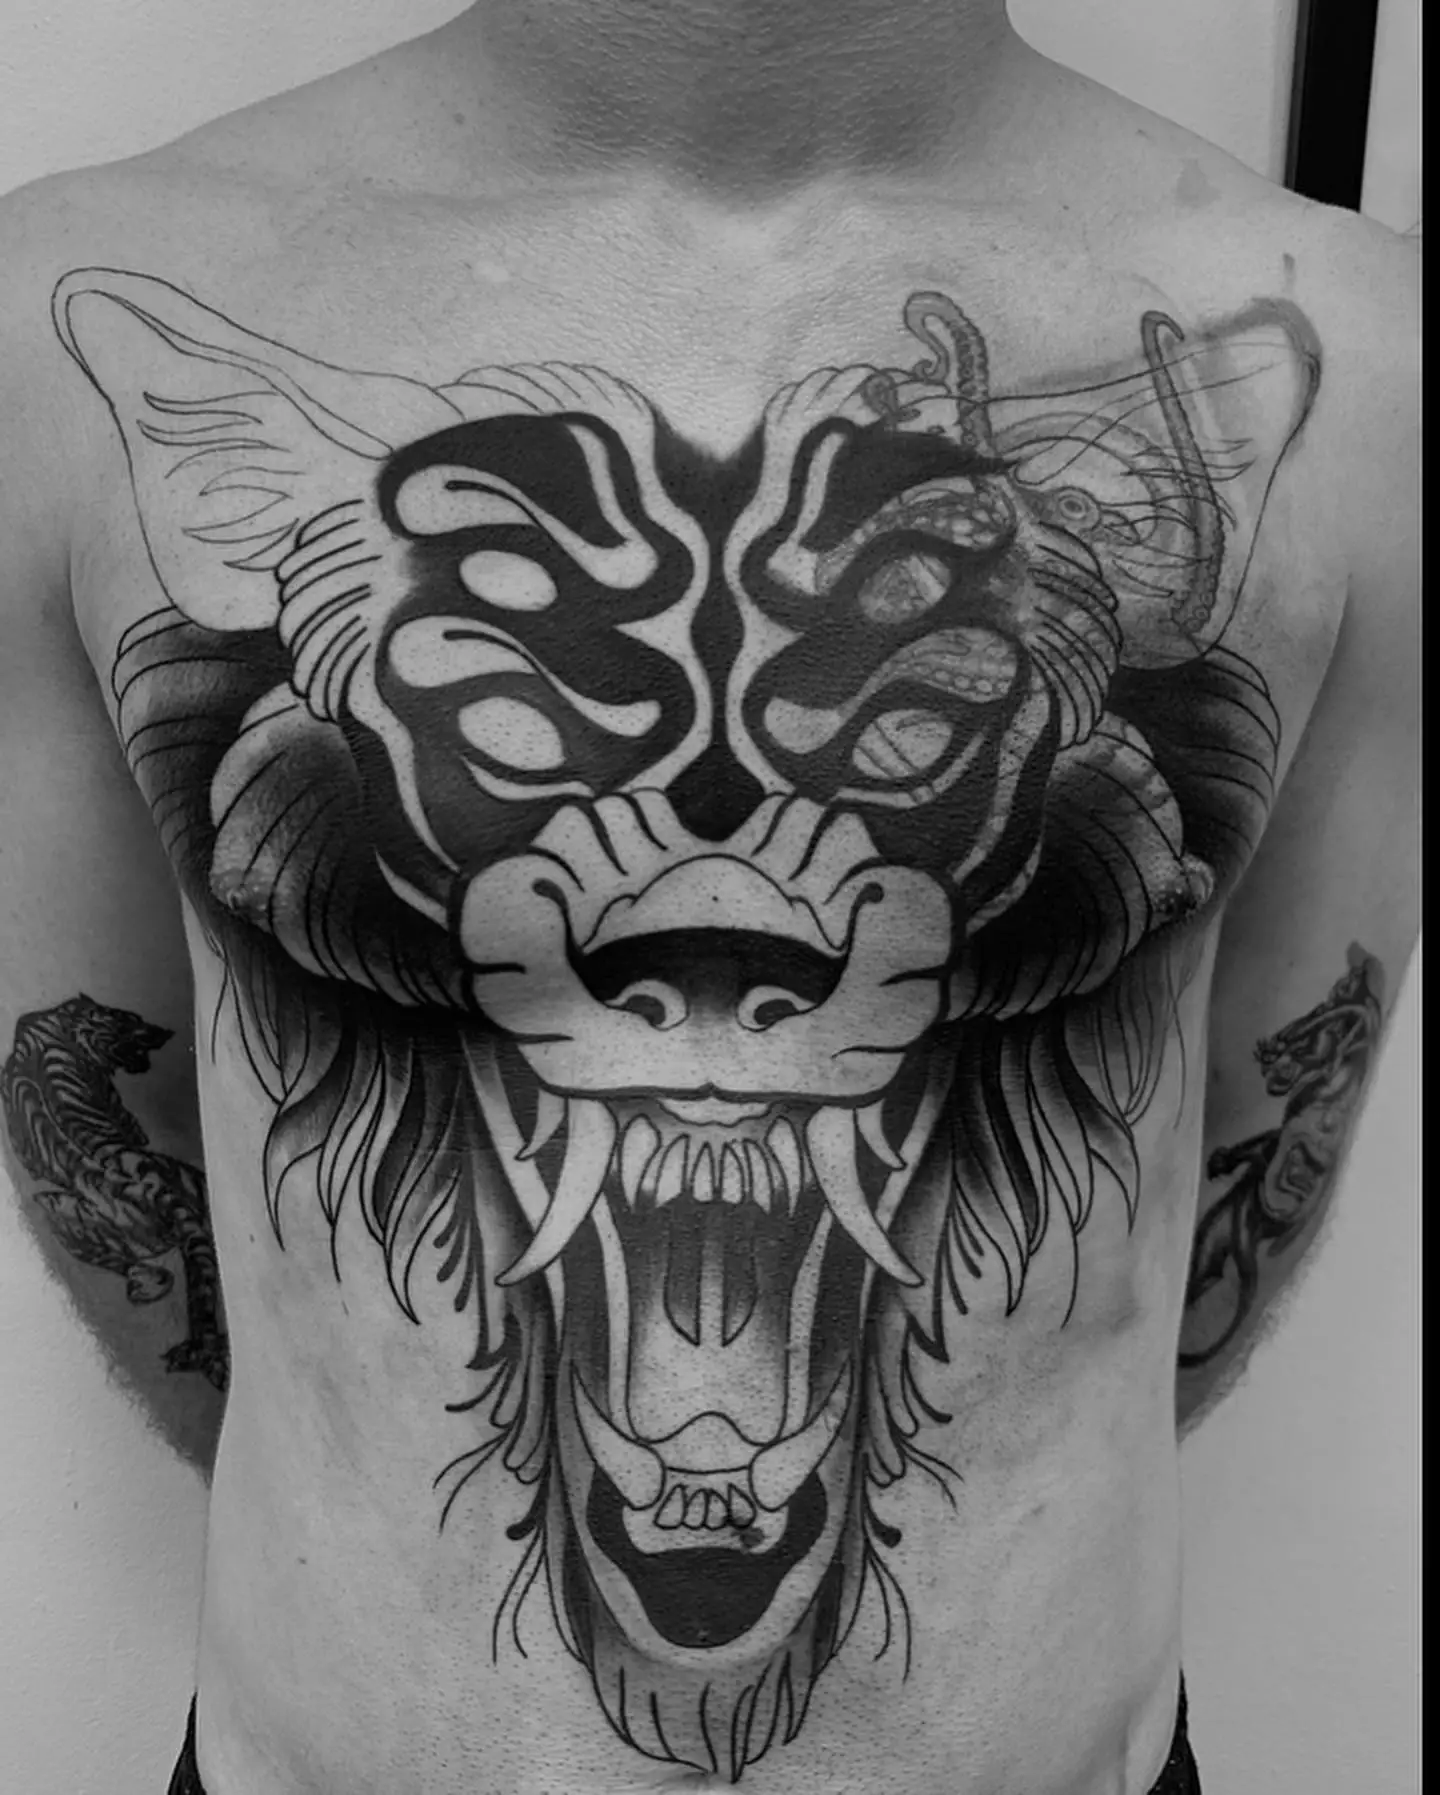 Wolf tattoo on chest